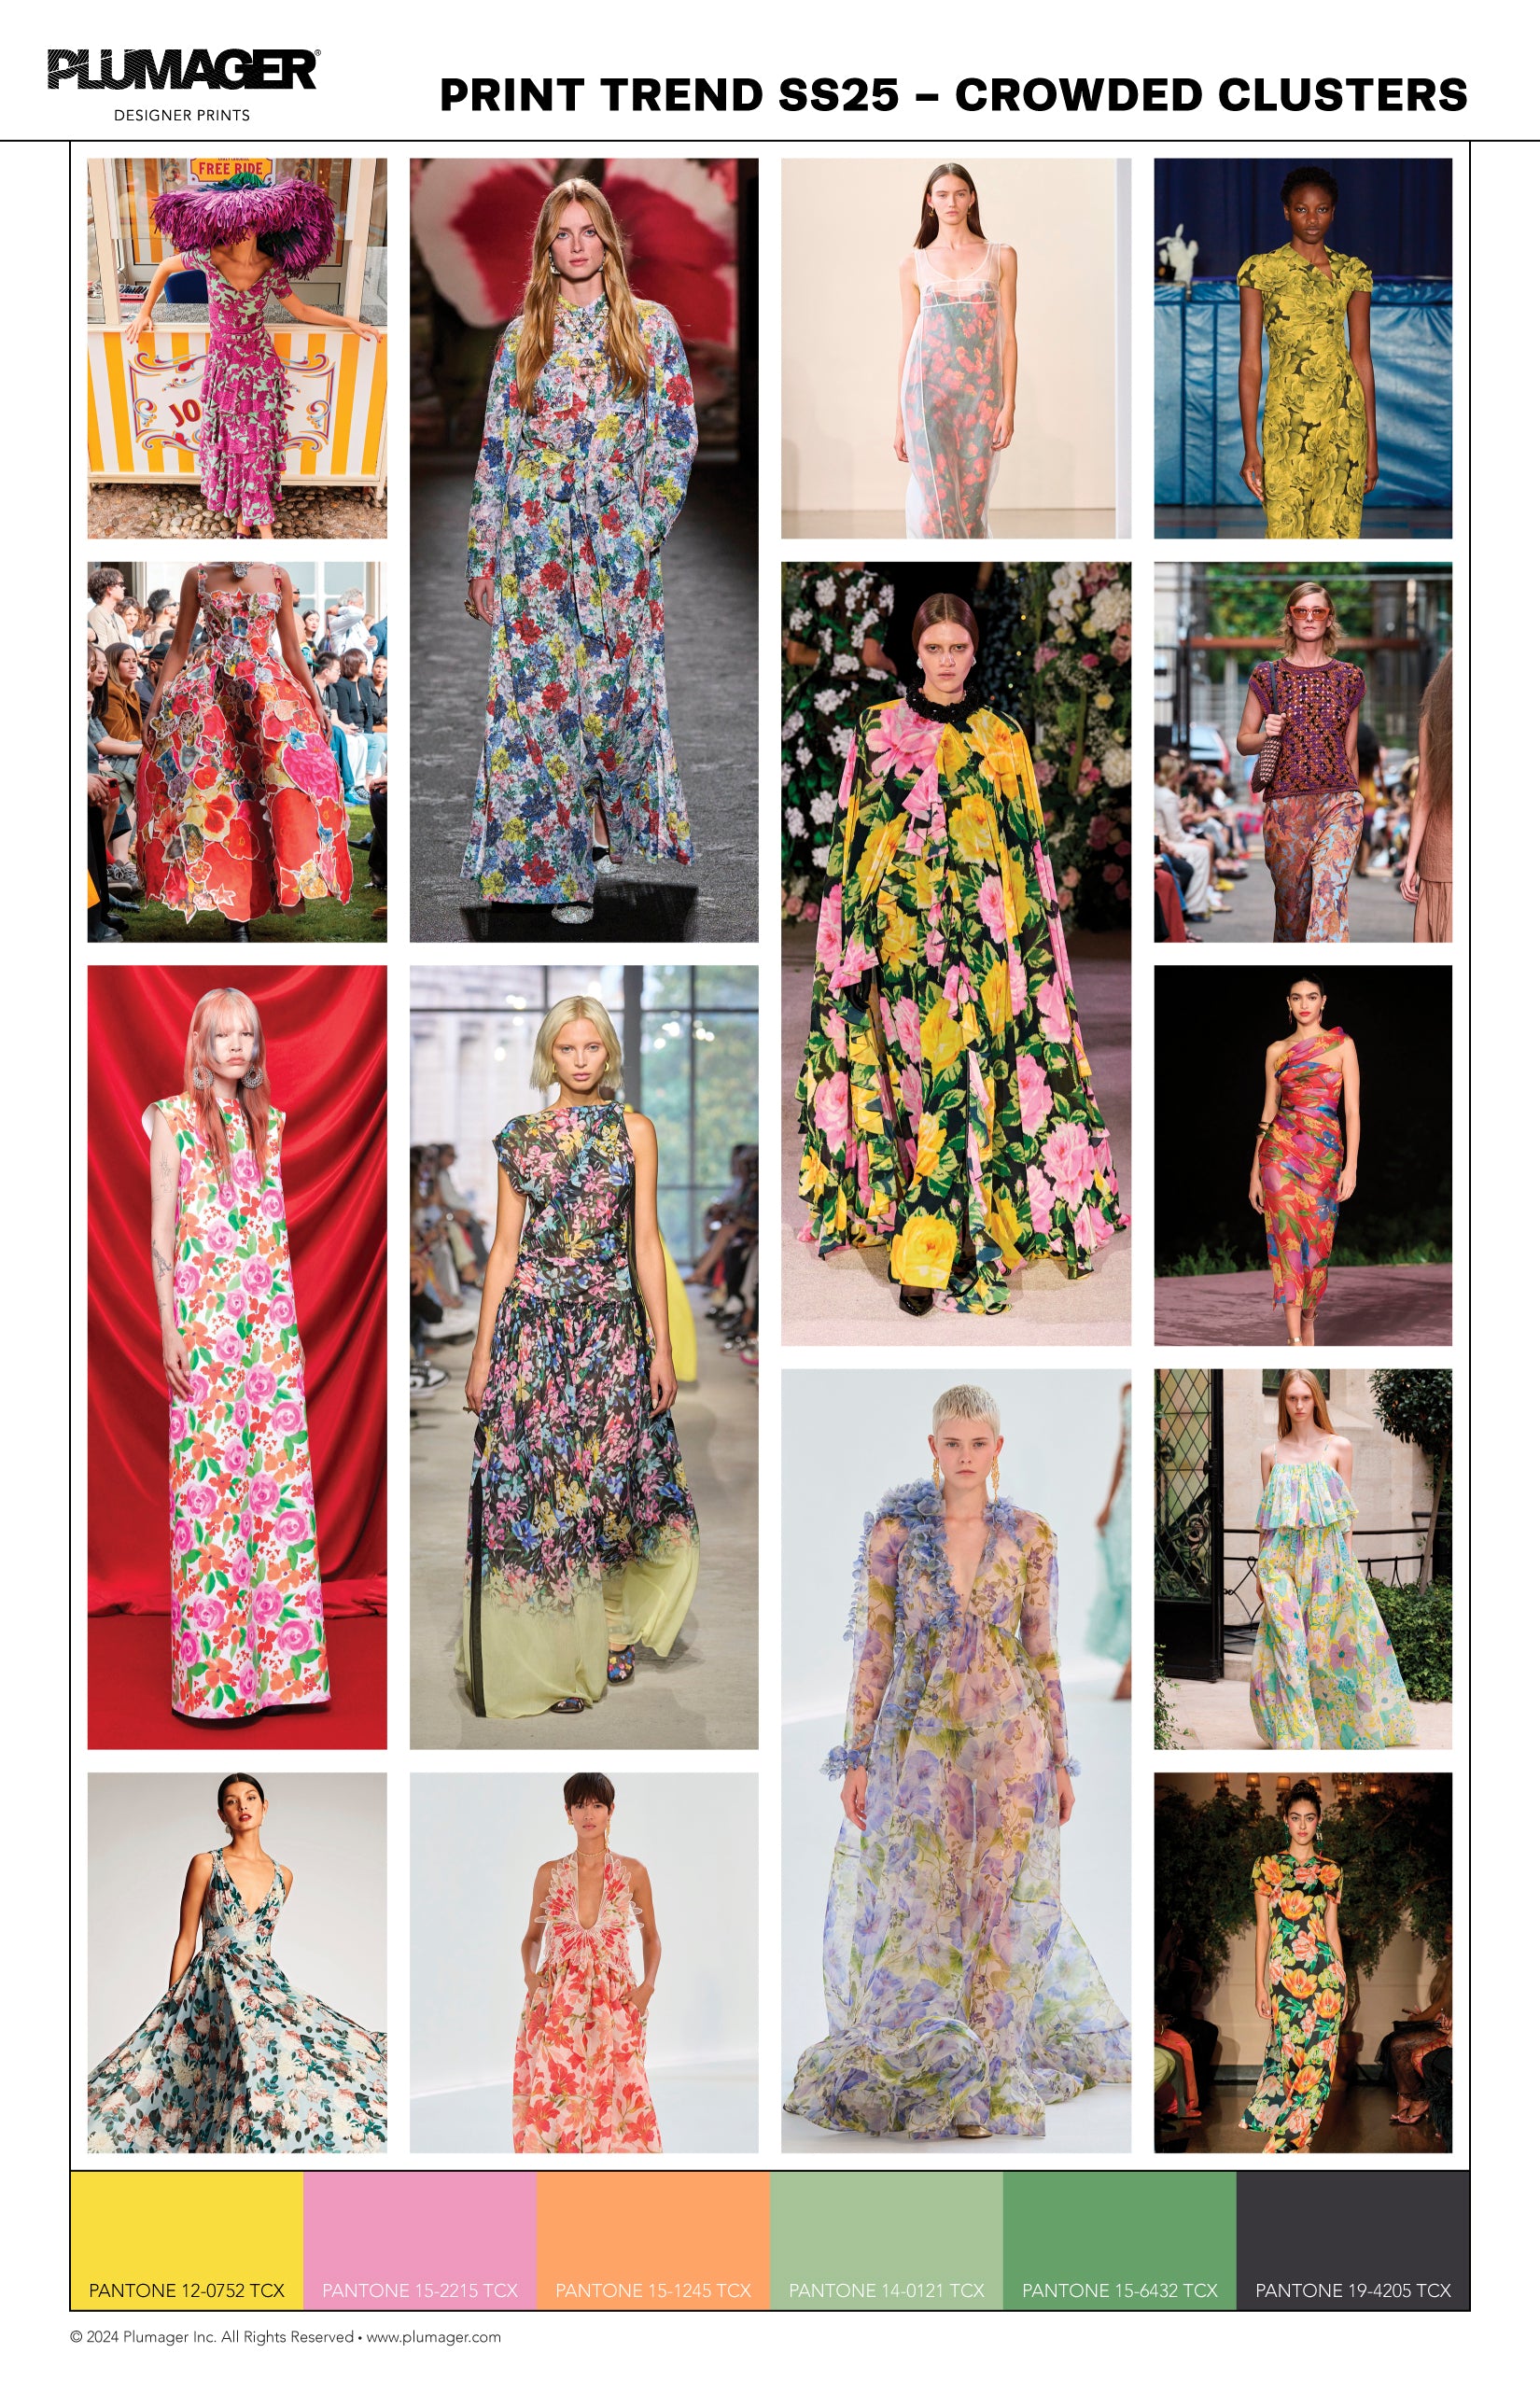 SS25 Print Textile Color Trend Report - Crowded Clusters